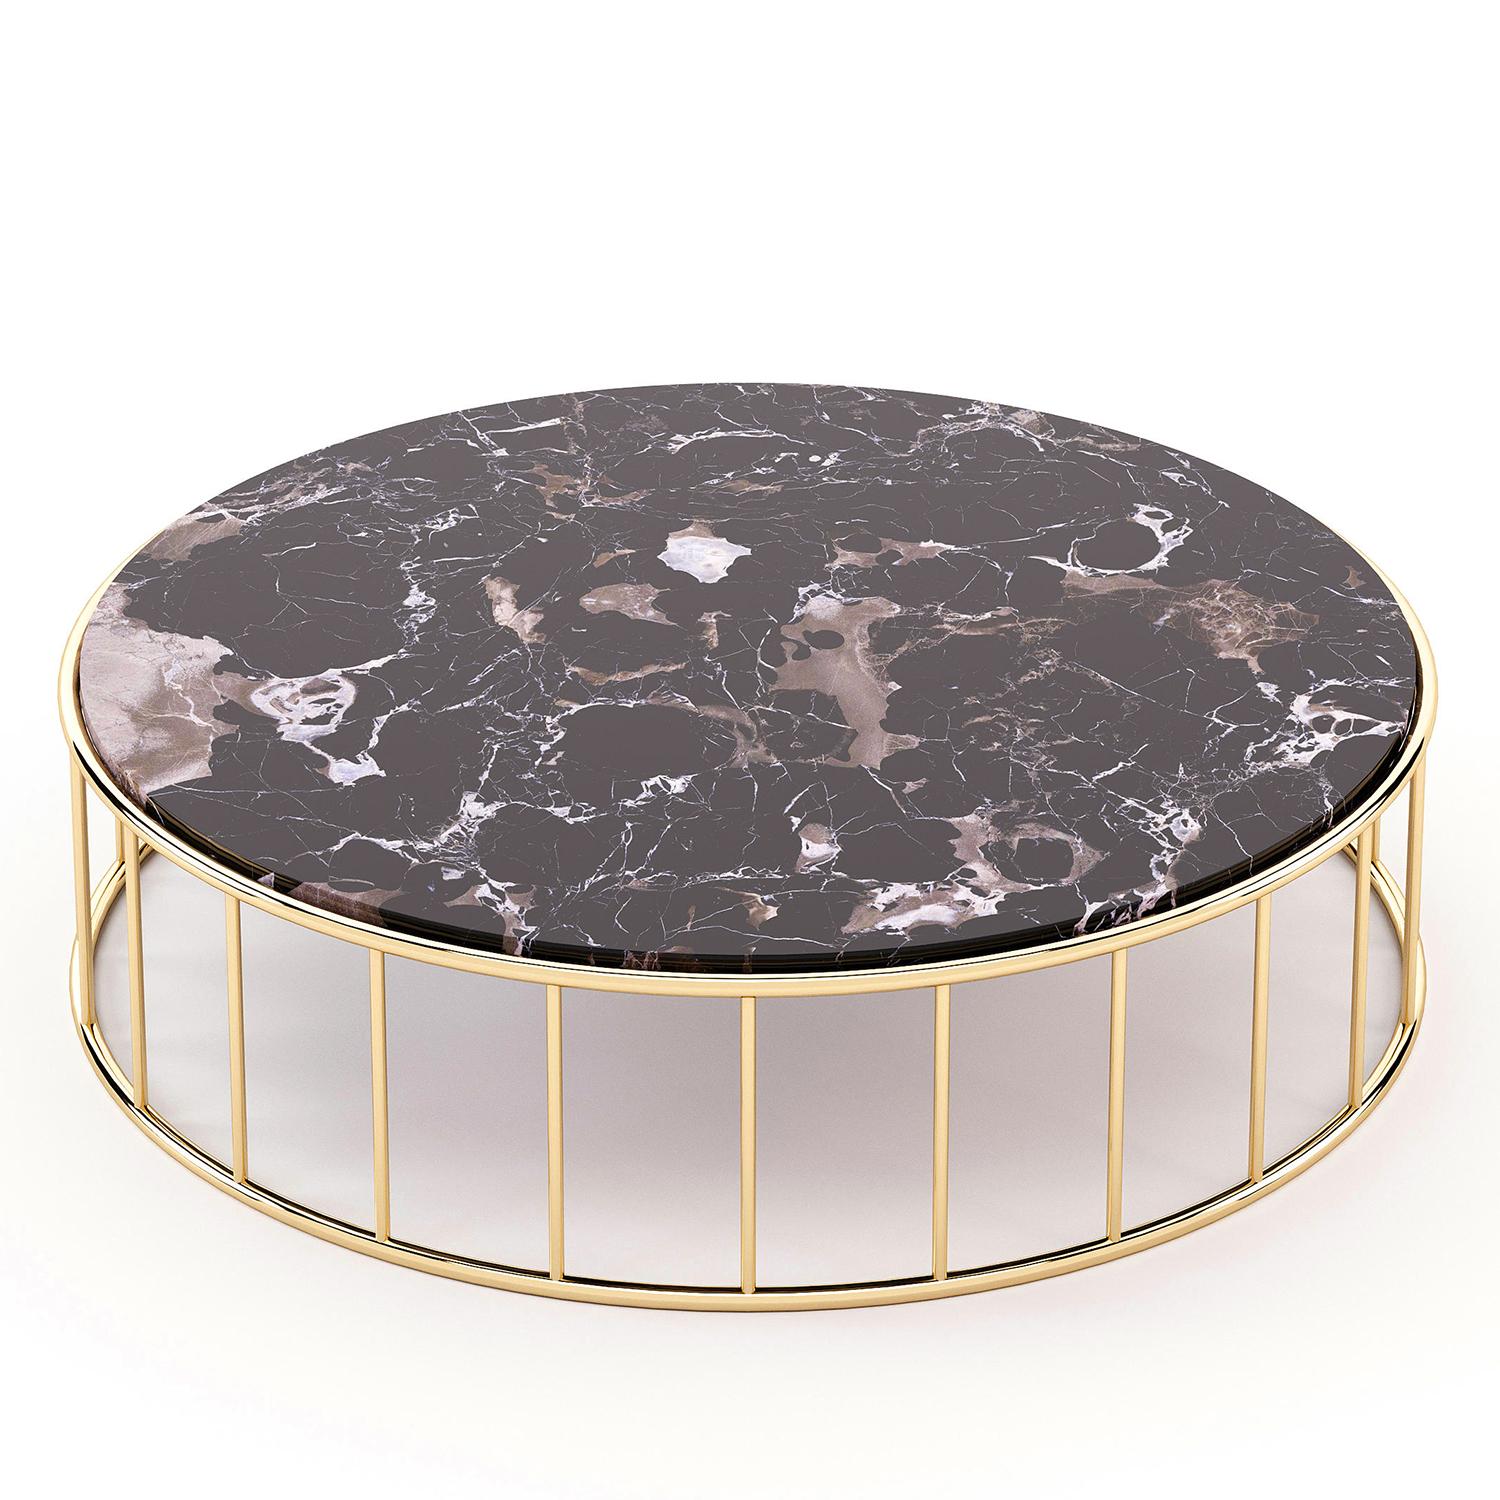 Coffee Table Arteum with structure in polished stainless
steel in gold finish and with round top in black marble with 
clear and dark grey tones.